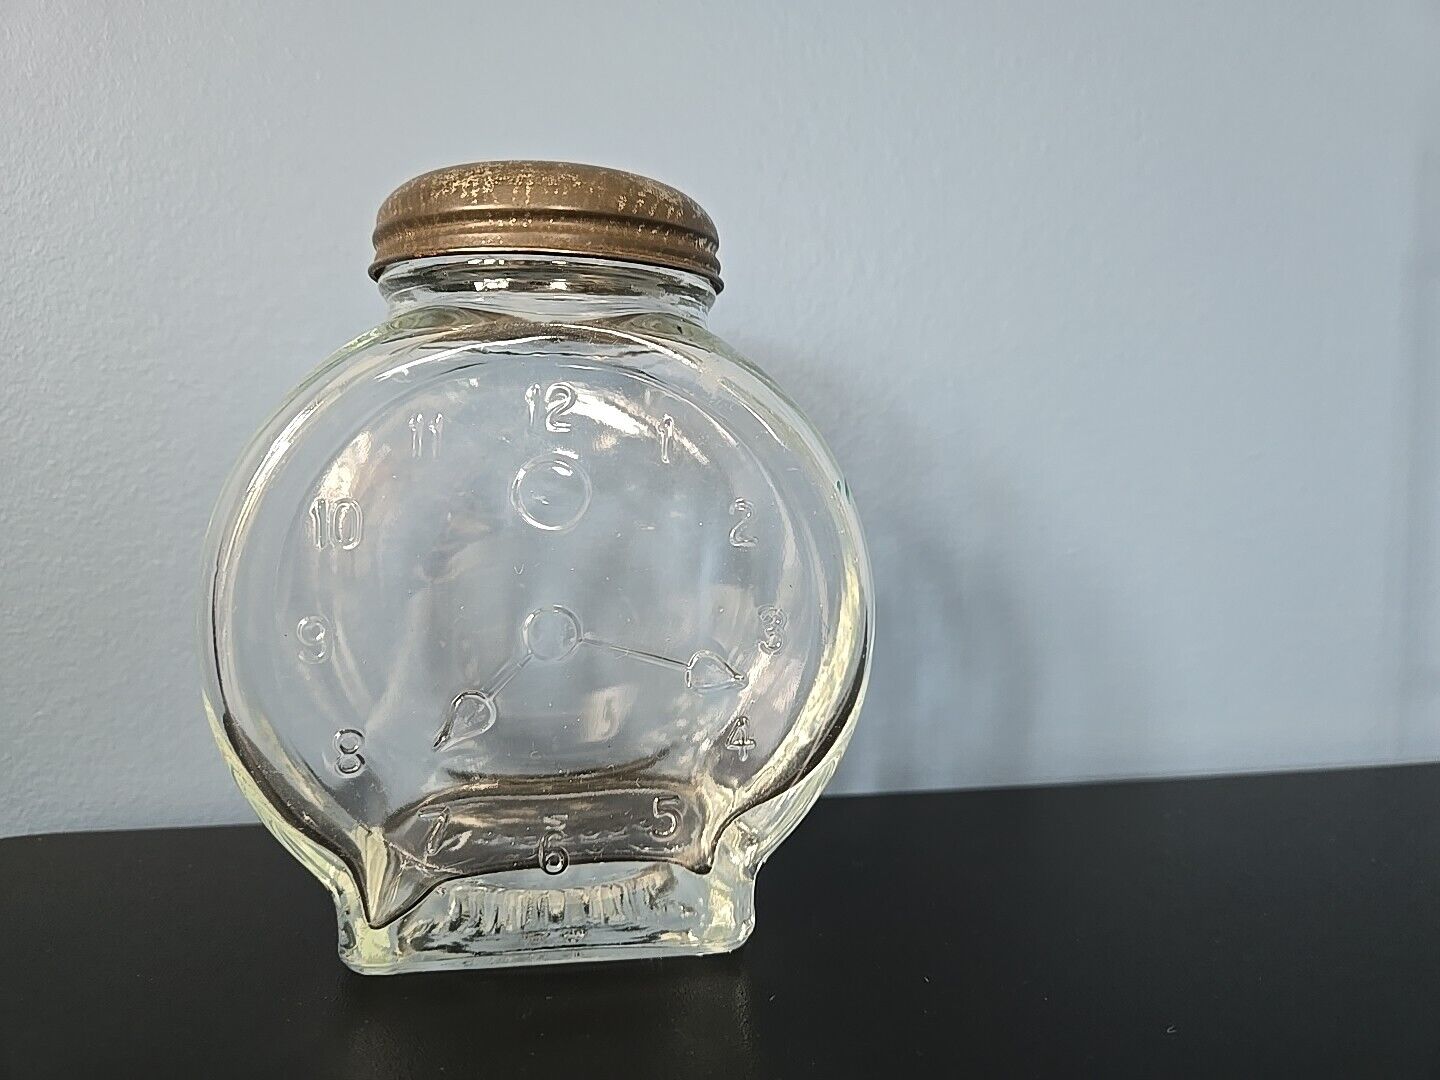 Vintage Early Underwood Nash's Mustard Clock Faced Glass Jar with Lid